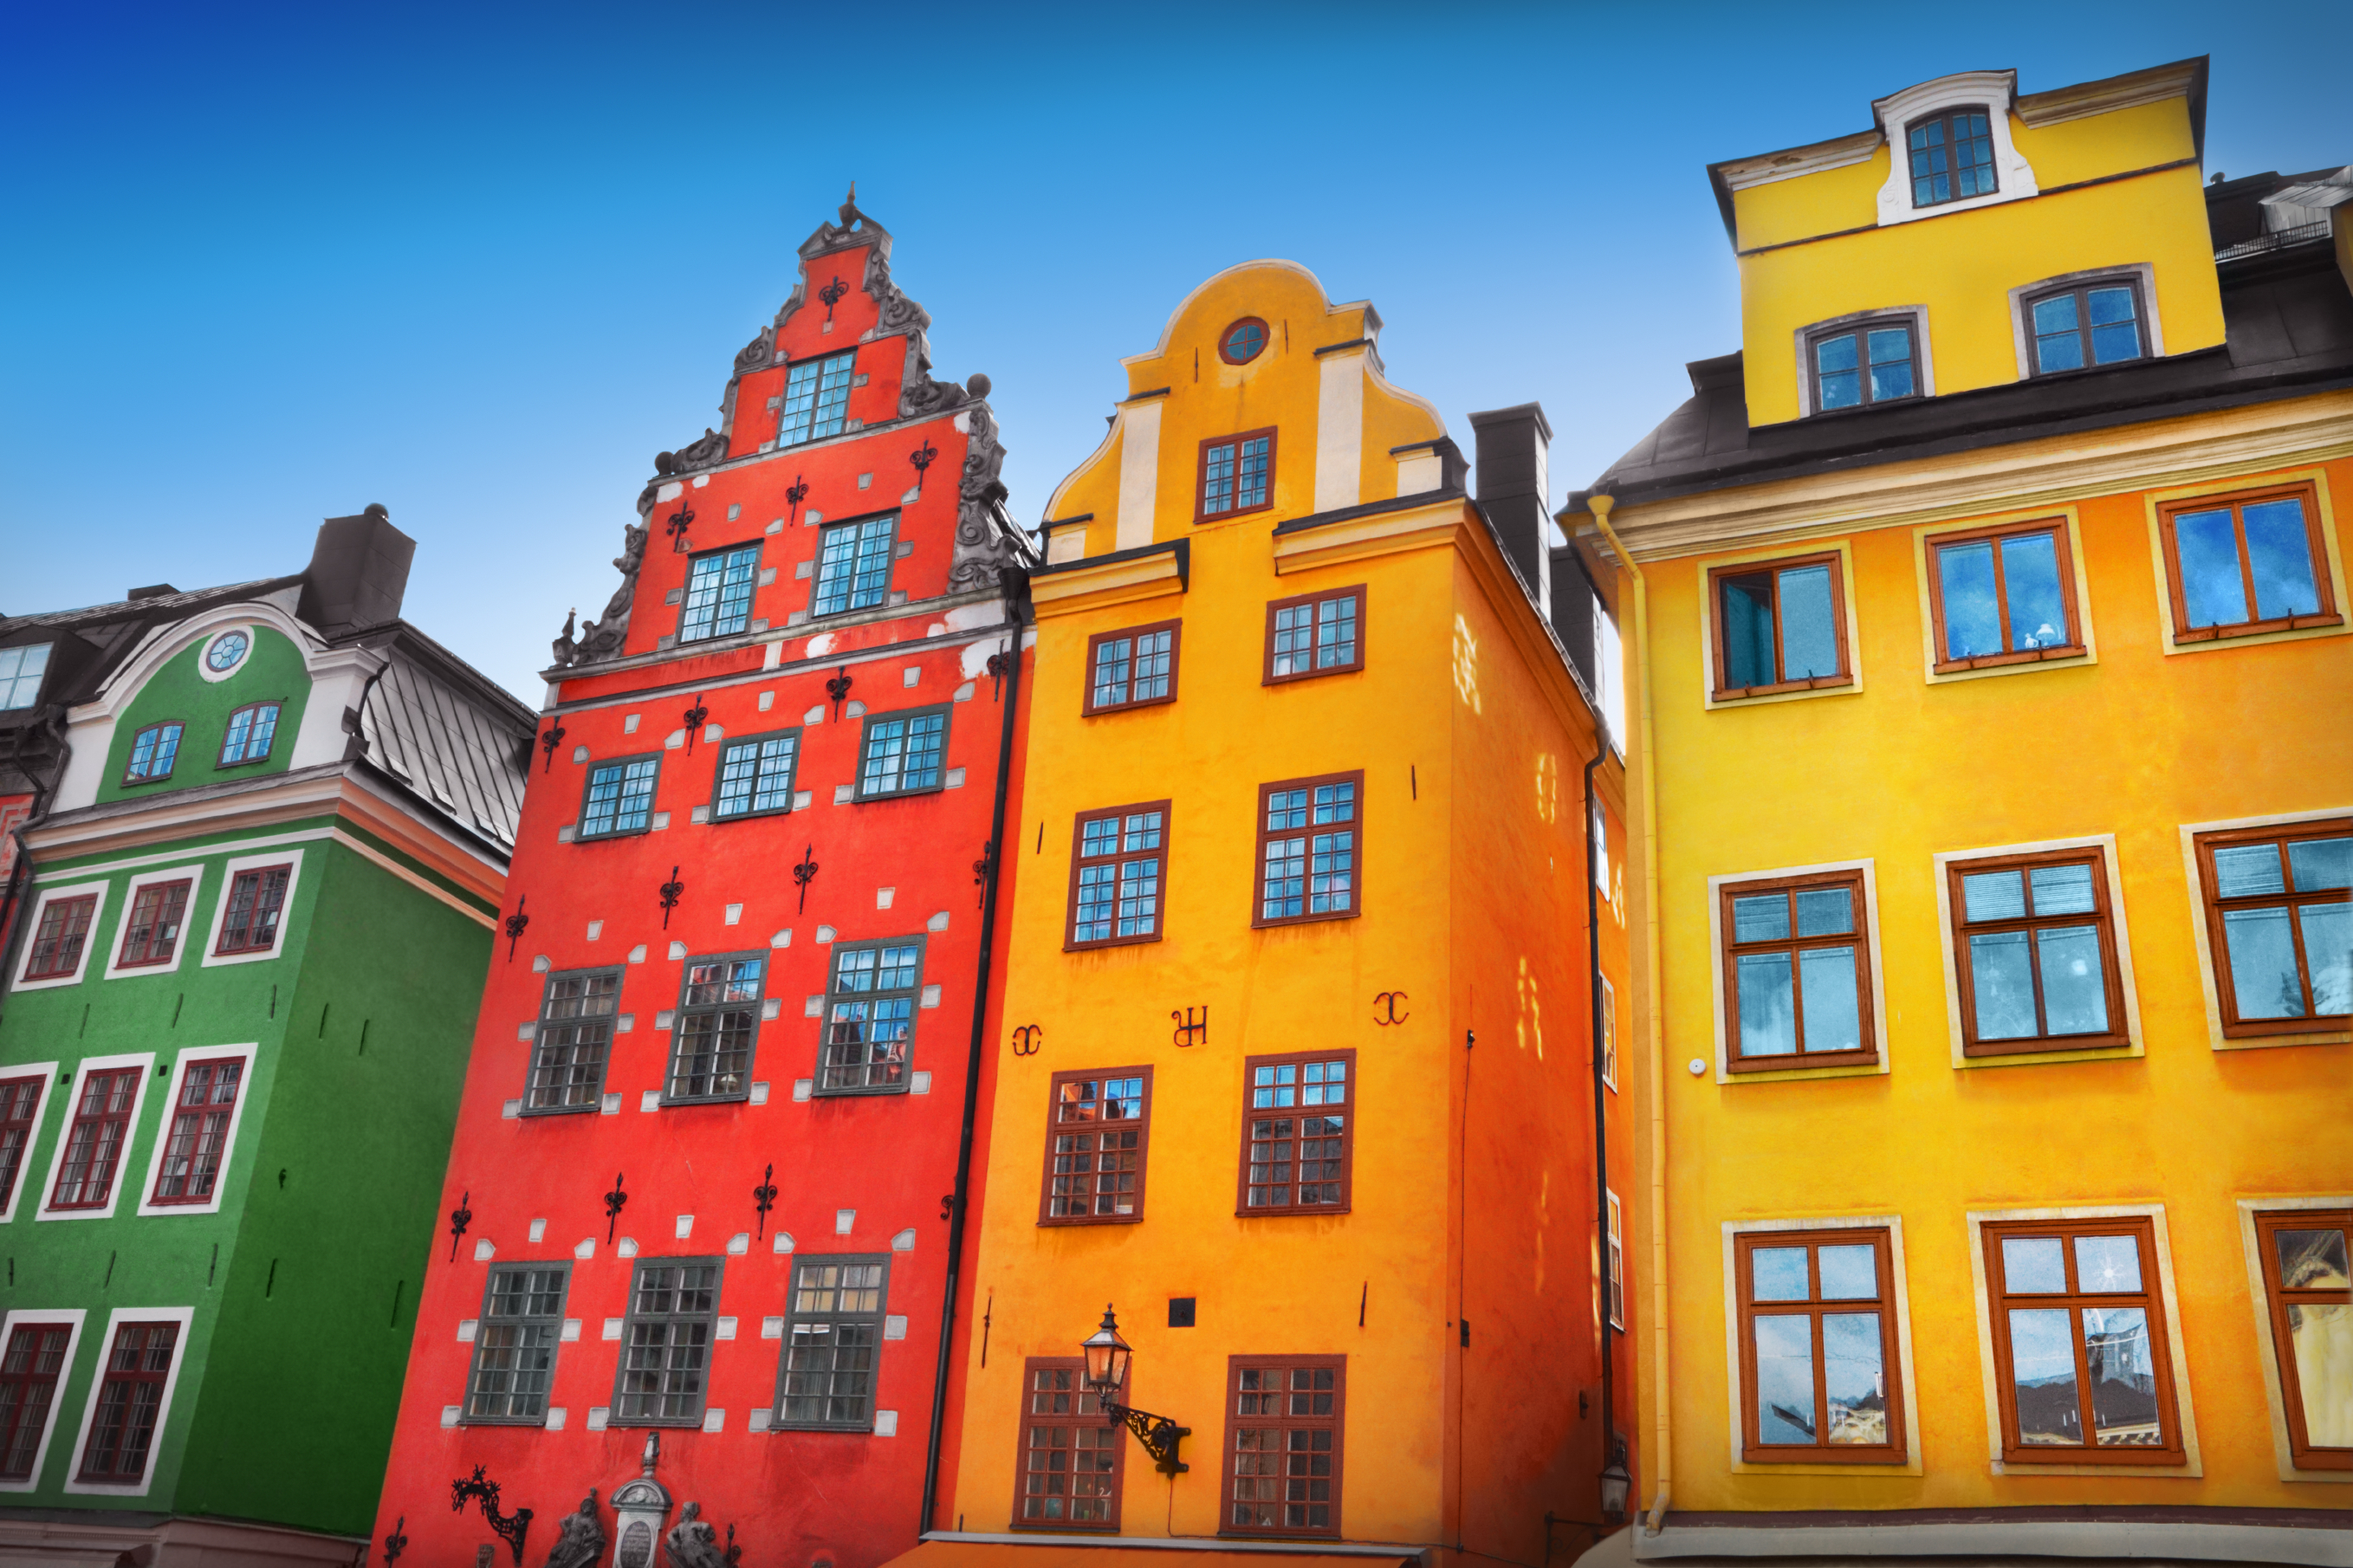 Houses on the island of Gamla Stan in Stockholm, Sweden